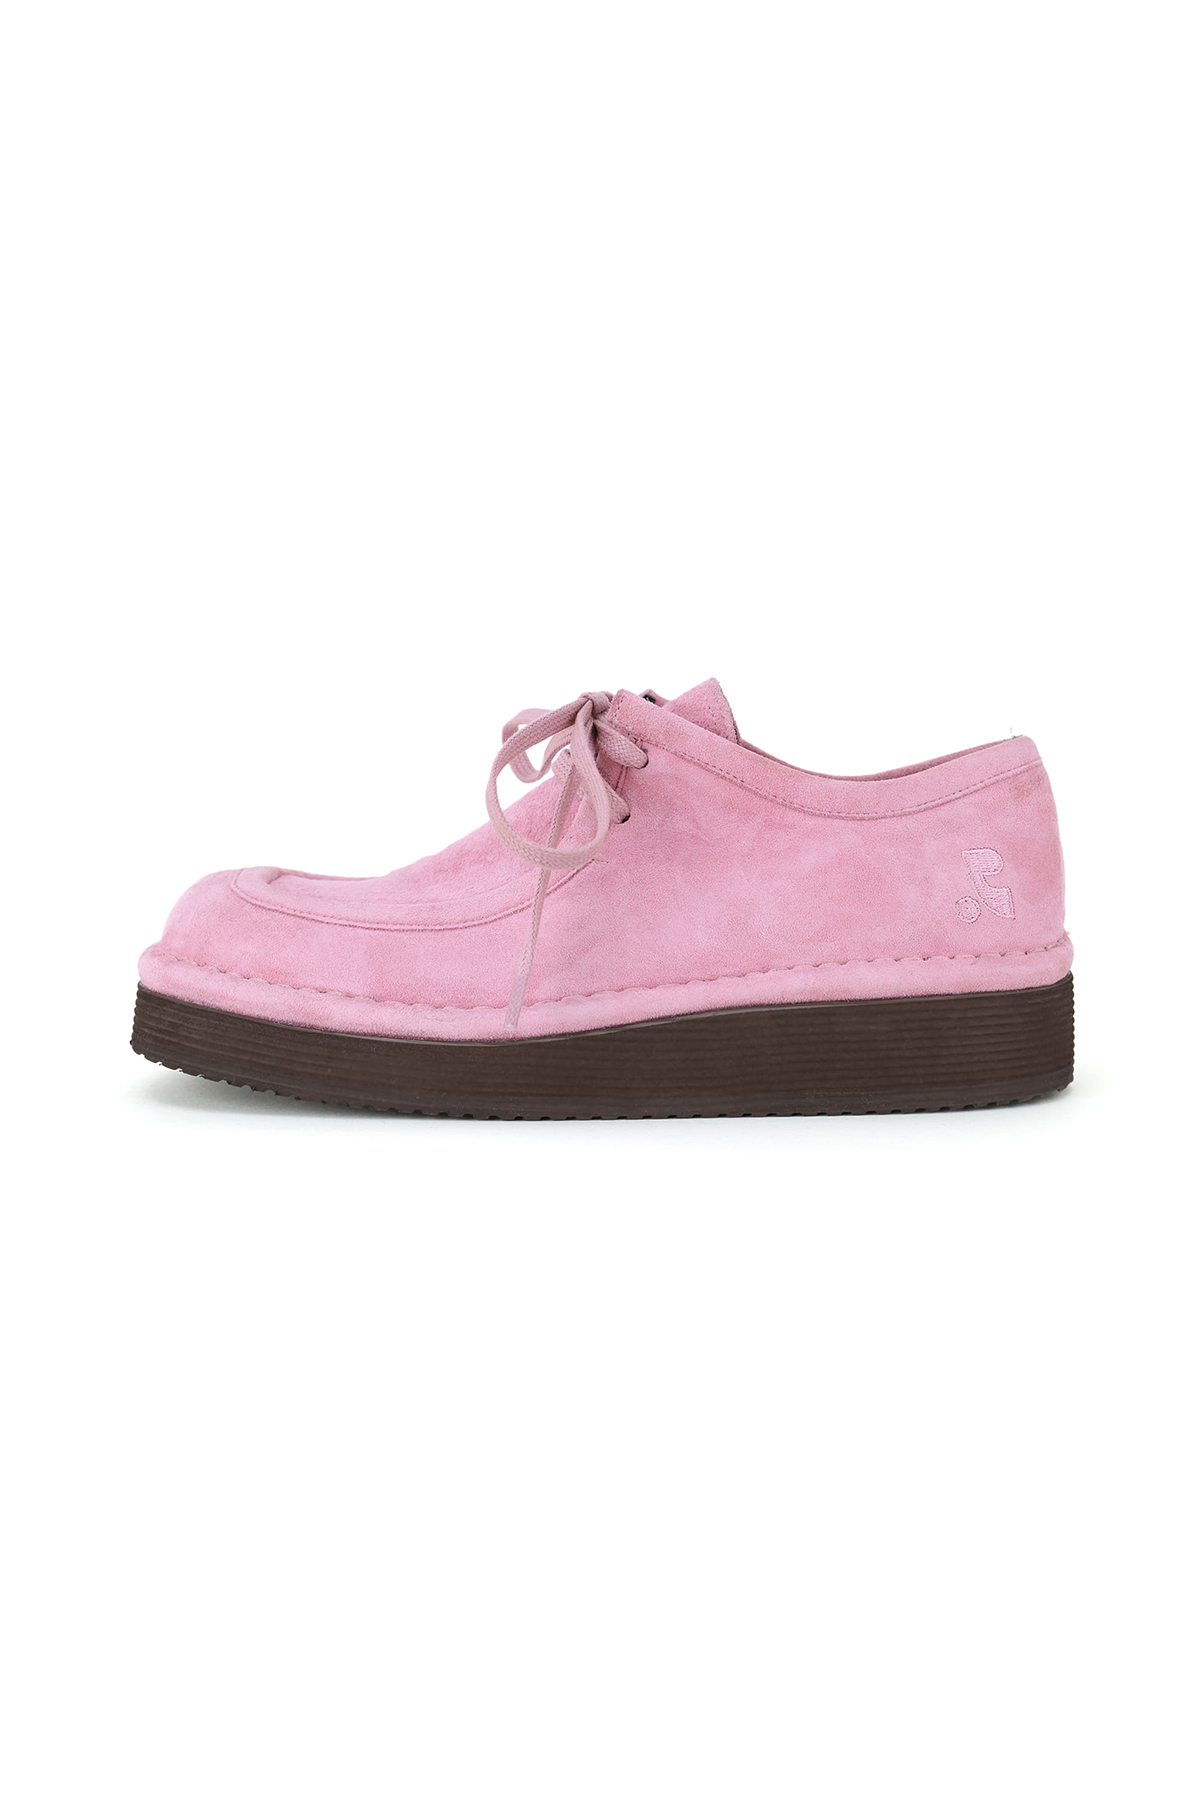 CHUKKA DERBY (RR with KHIHO) - PINK